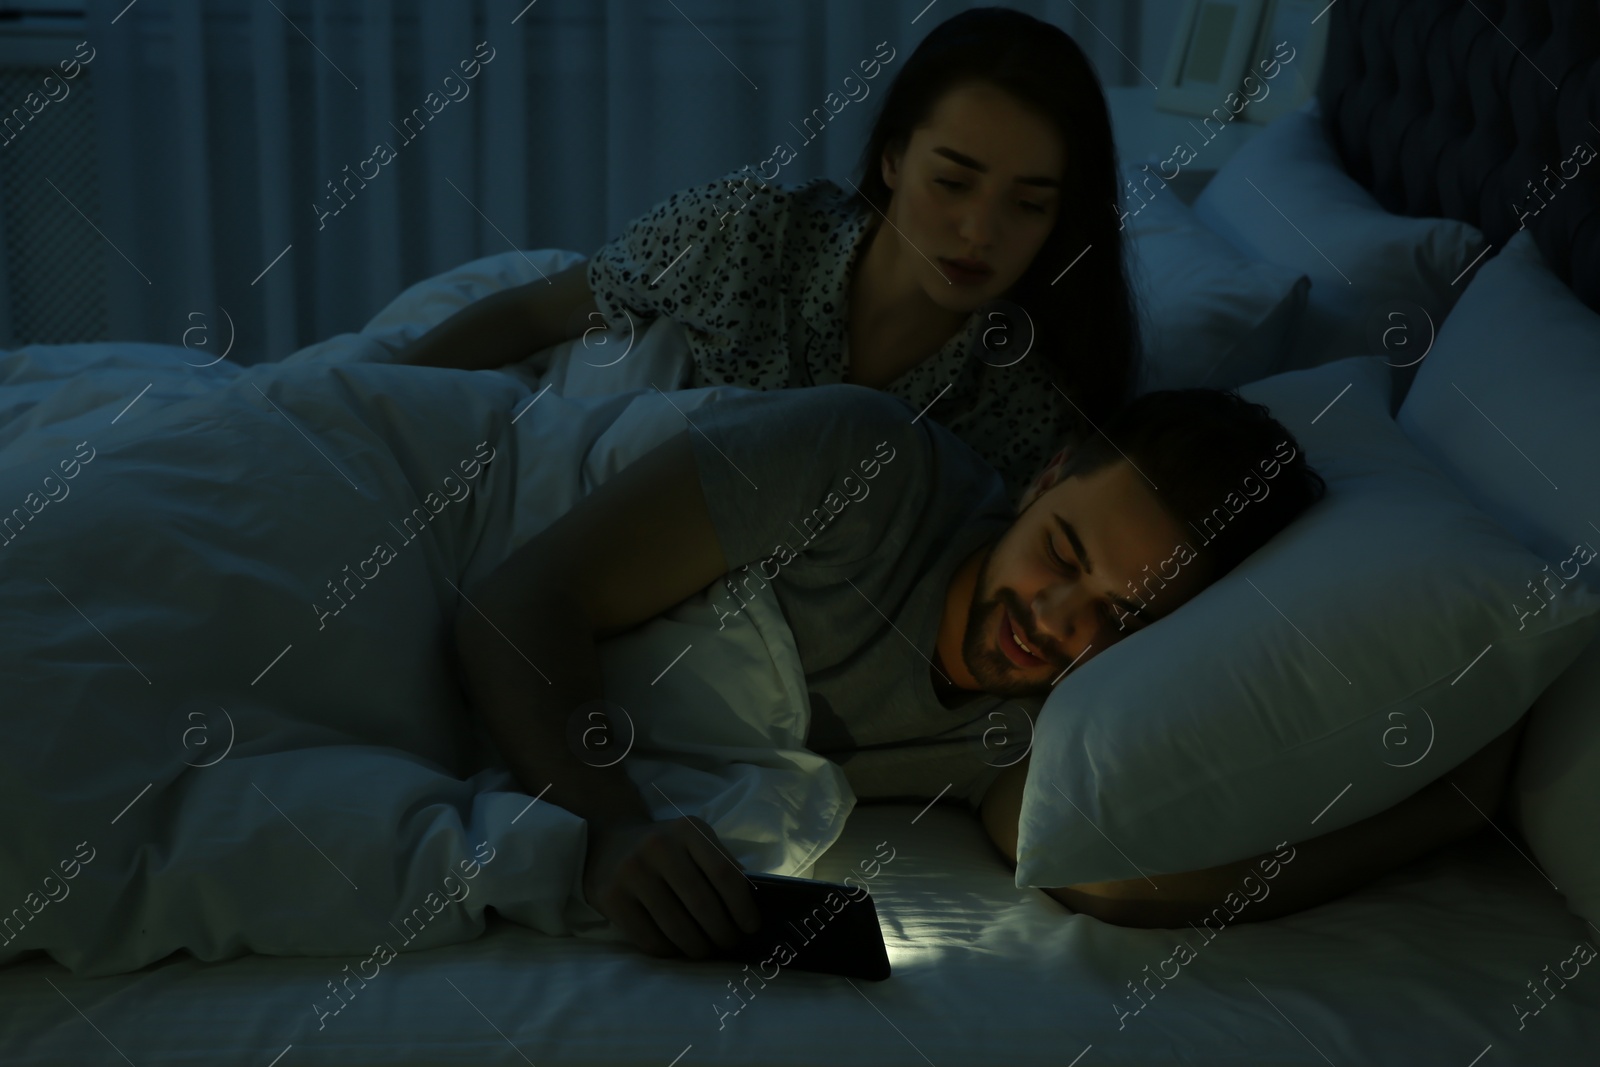 Photo of Distrustful young woman peering into boyfriend's smartphone in bed at night